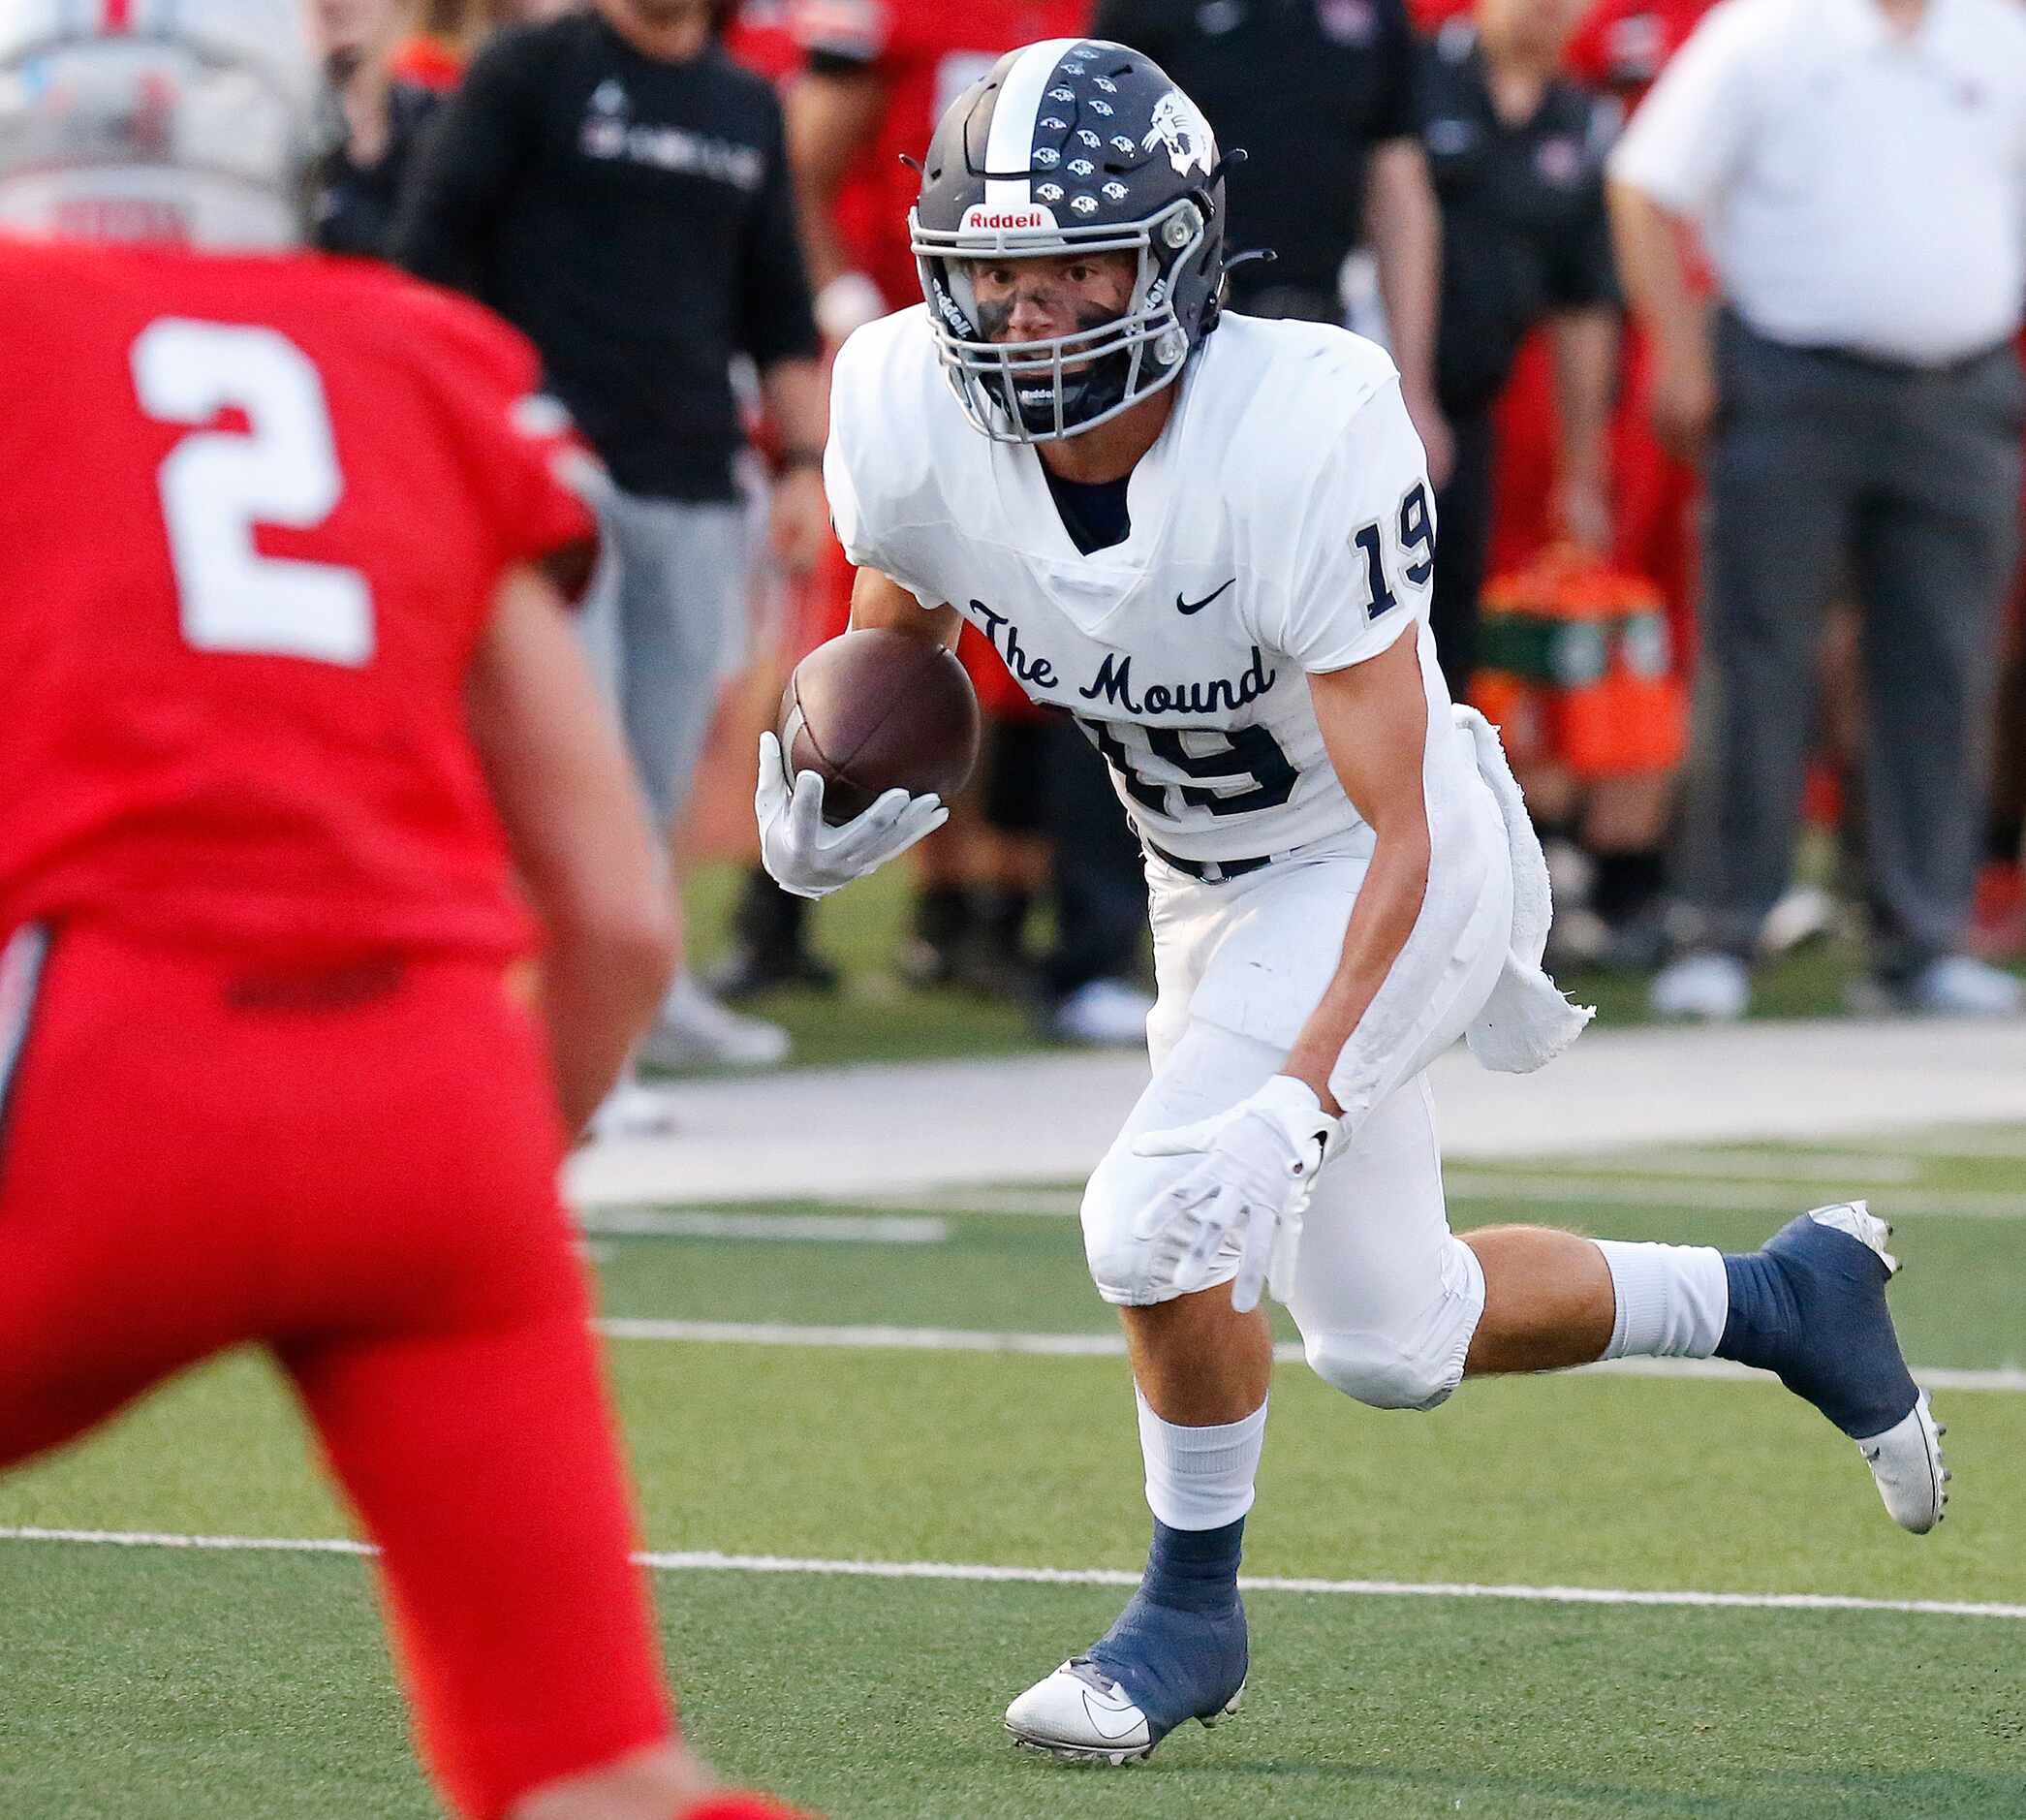 Flower Mound High School wide receiver Cade Edlein (19) gets yardage after the catch during...